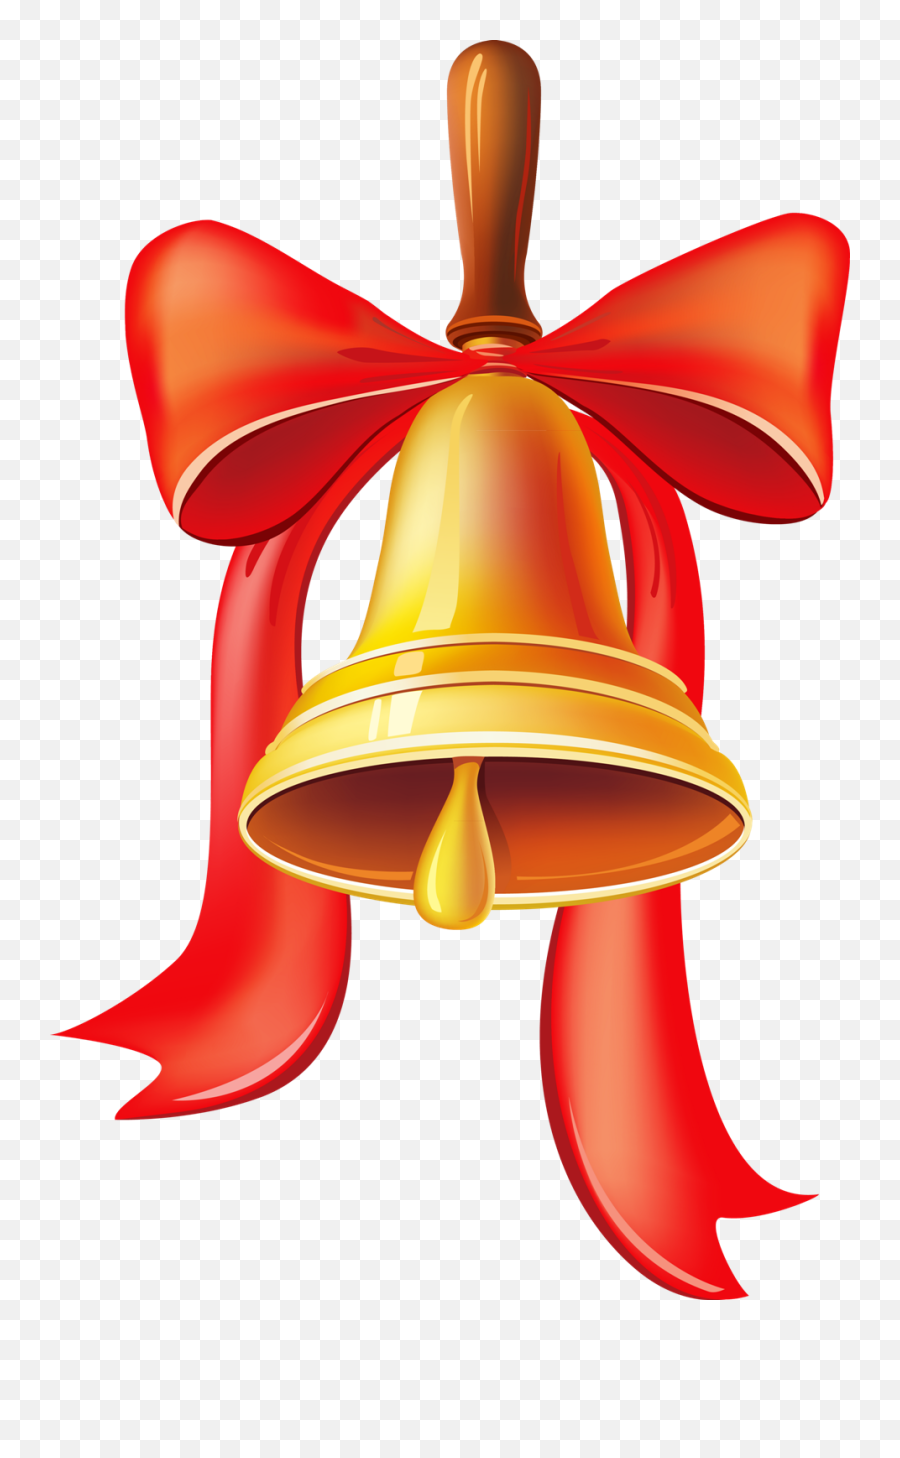 Christmas Bell With Big Ribbons Png Image - Purepng Free School Bell Png,Christmas Bell Png